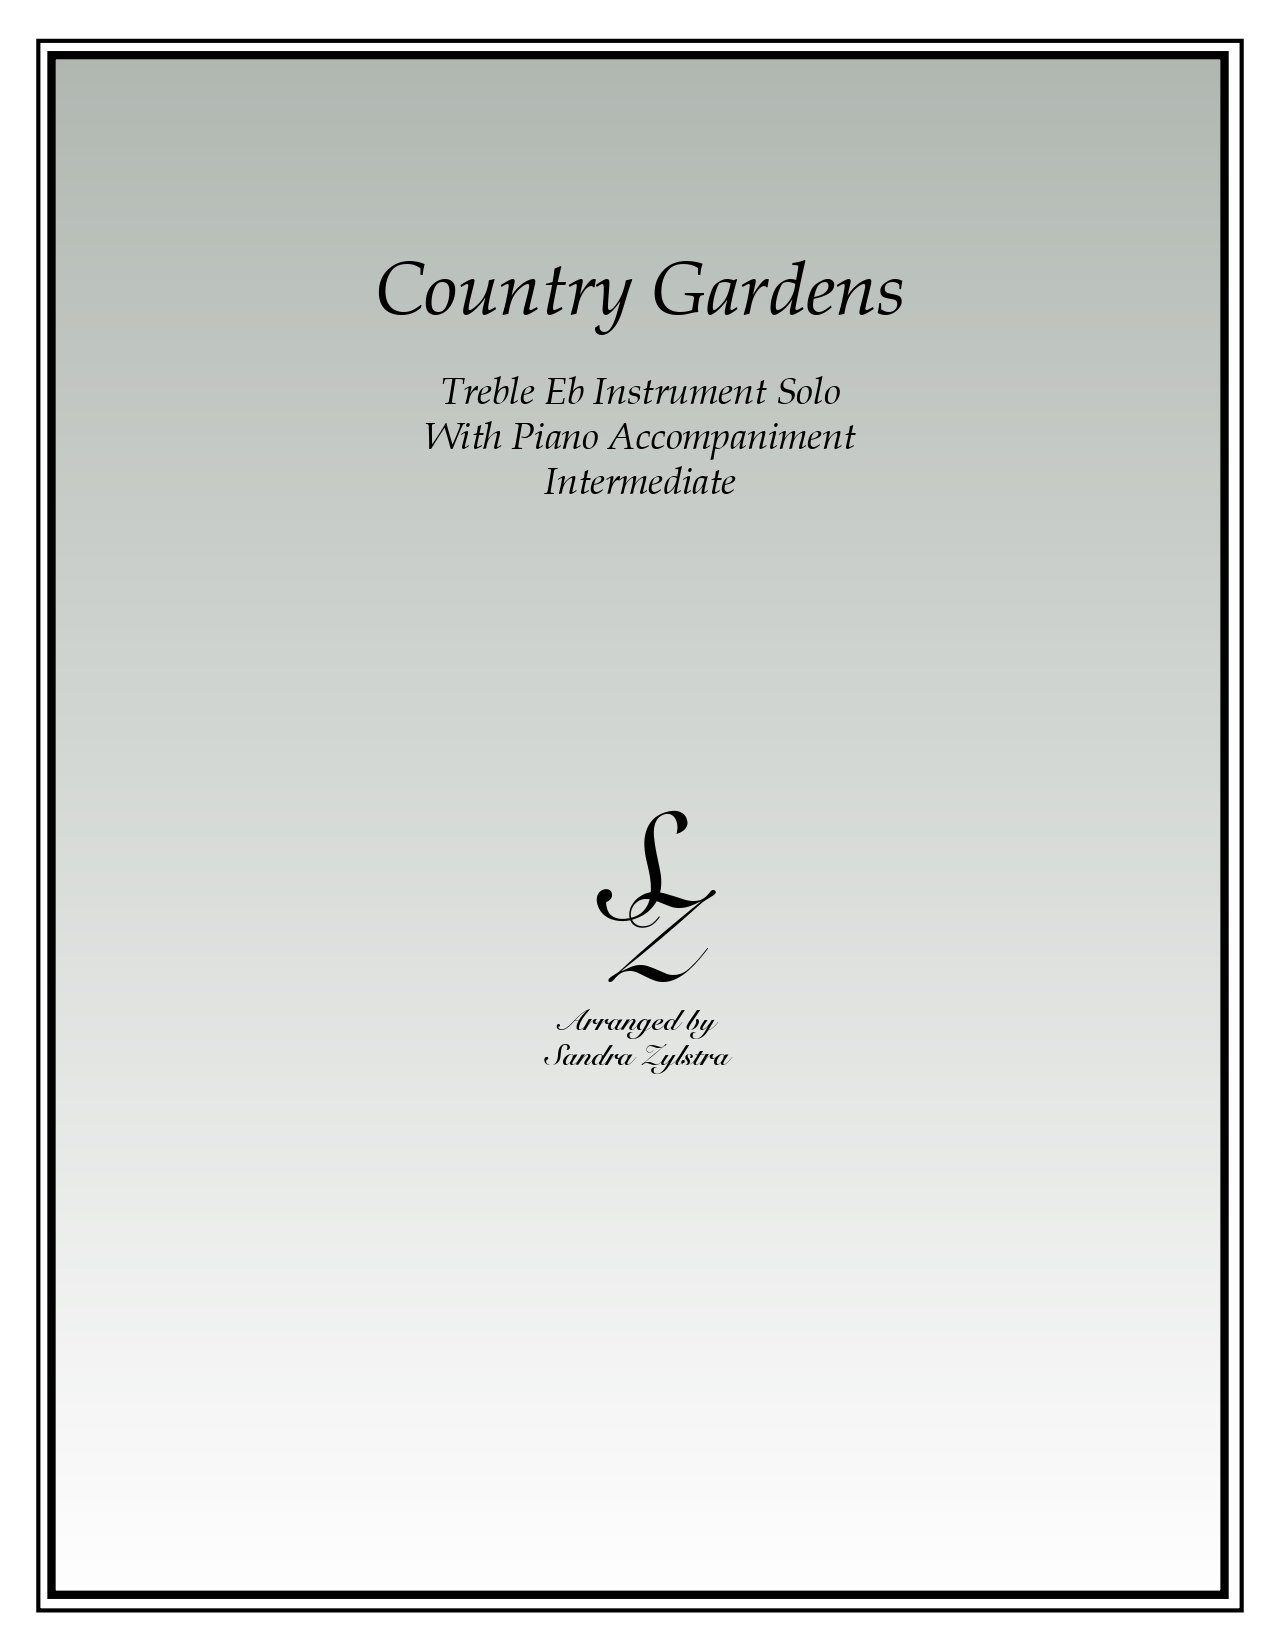 Country Gardens Eb instrument solo part cover page 00011